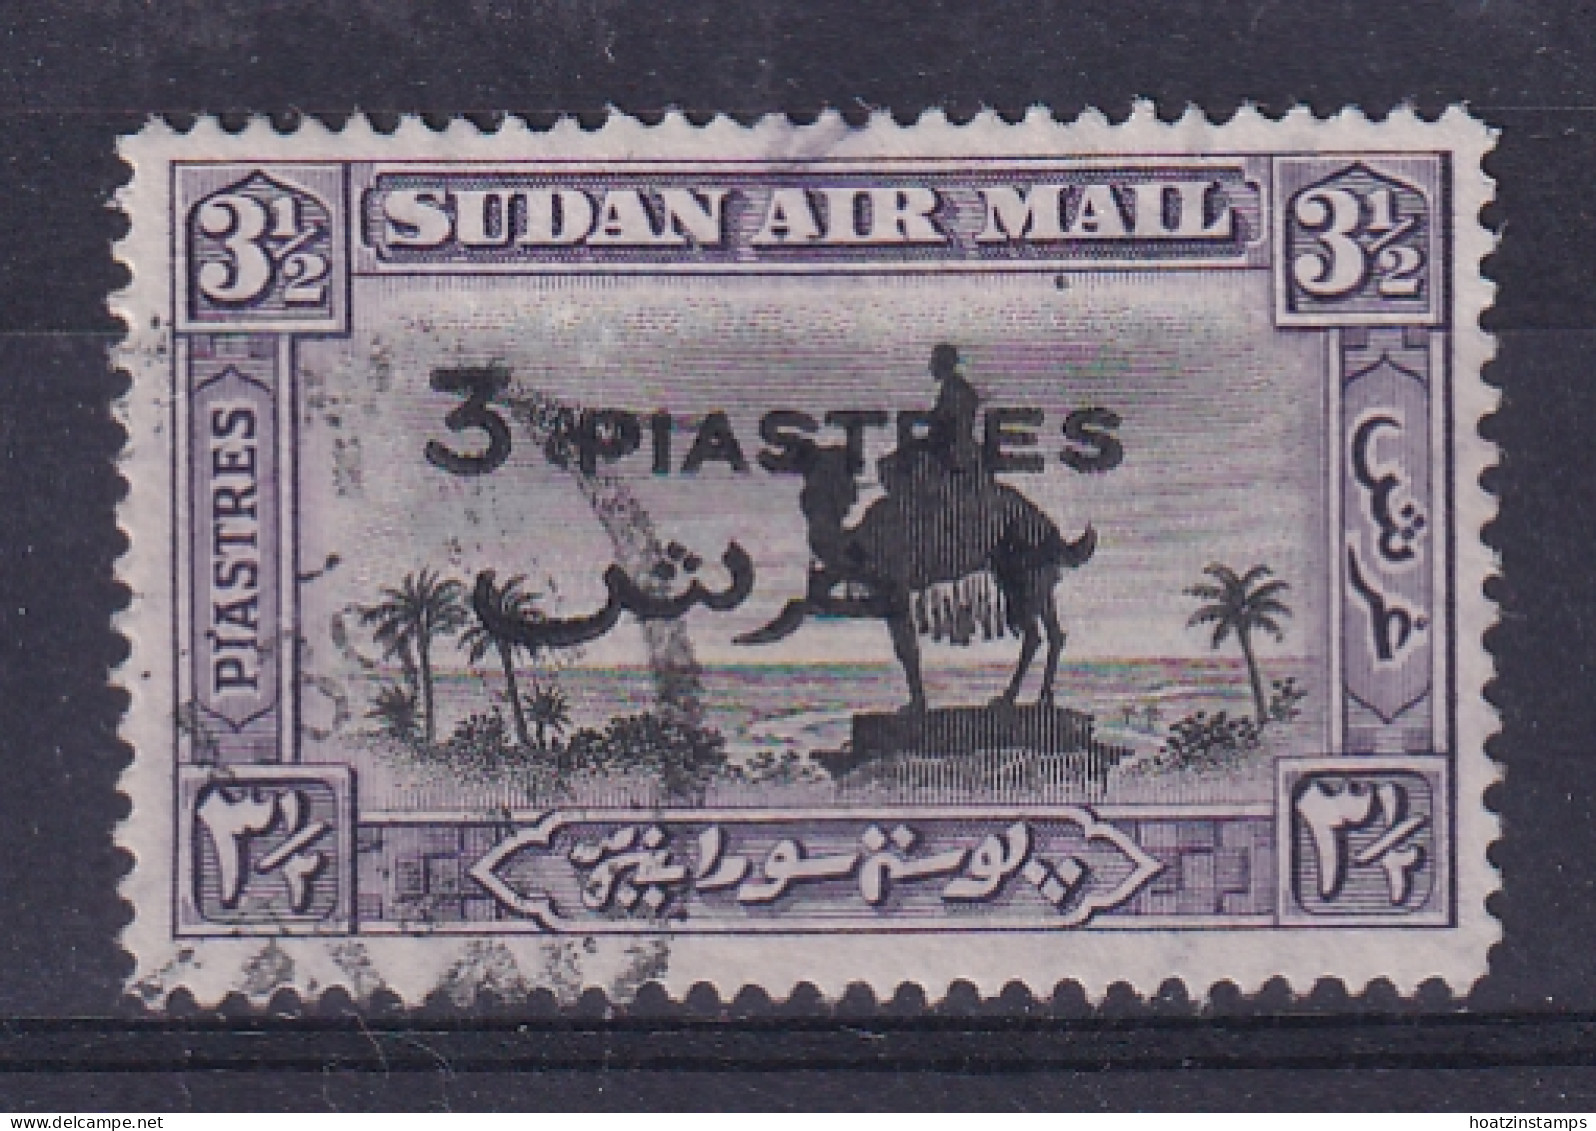 Sdn: 1938   Statue Of General Gordon - Surcharge  SG75    3P On 3½P  [Perf: 14]  Used - Soudan (...-1951)